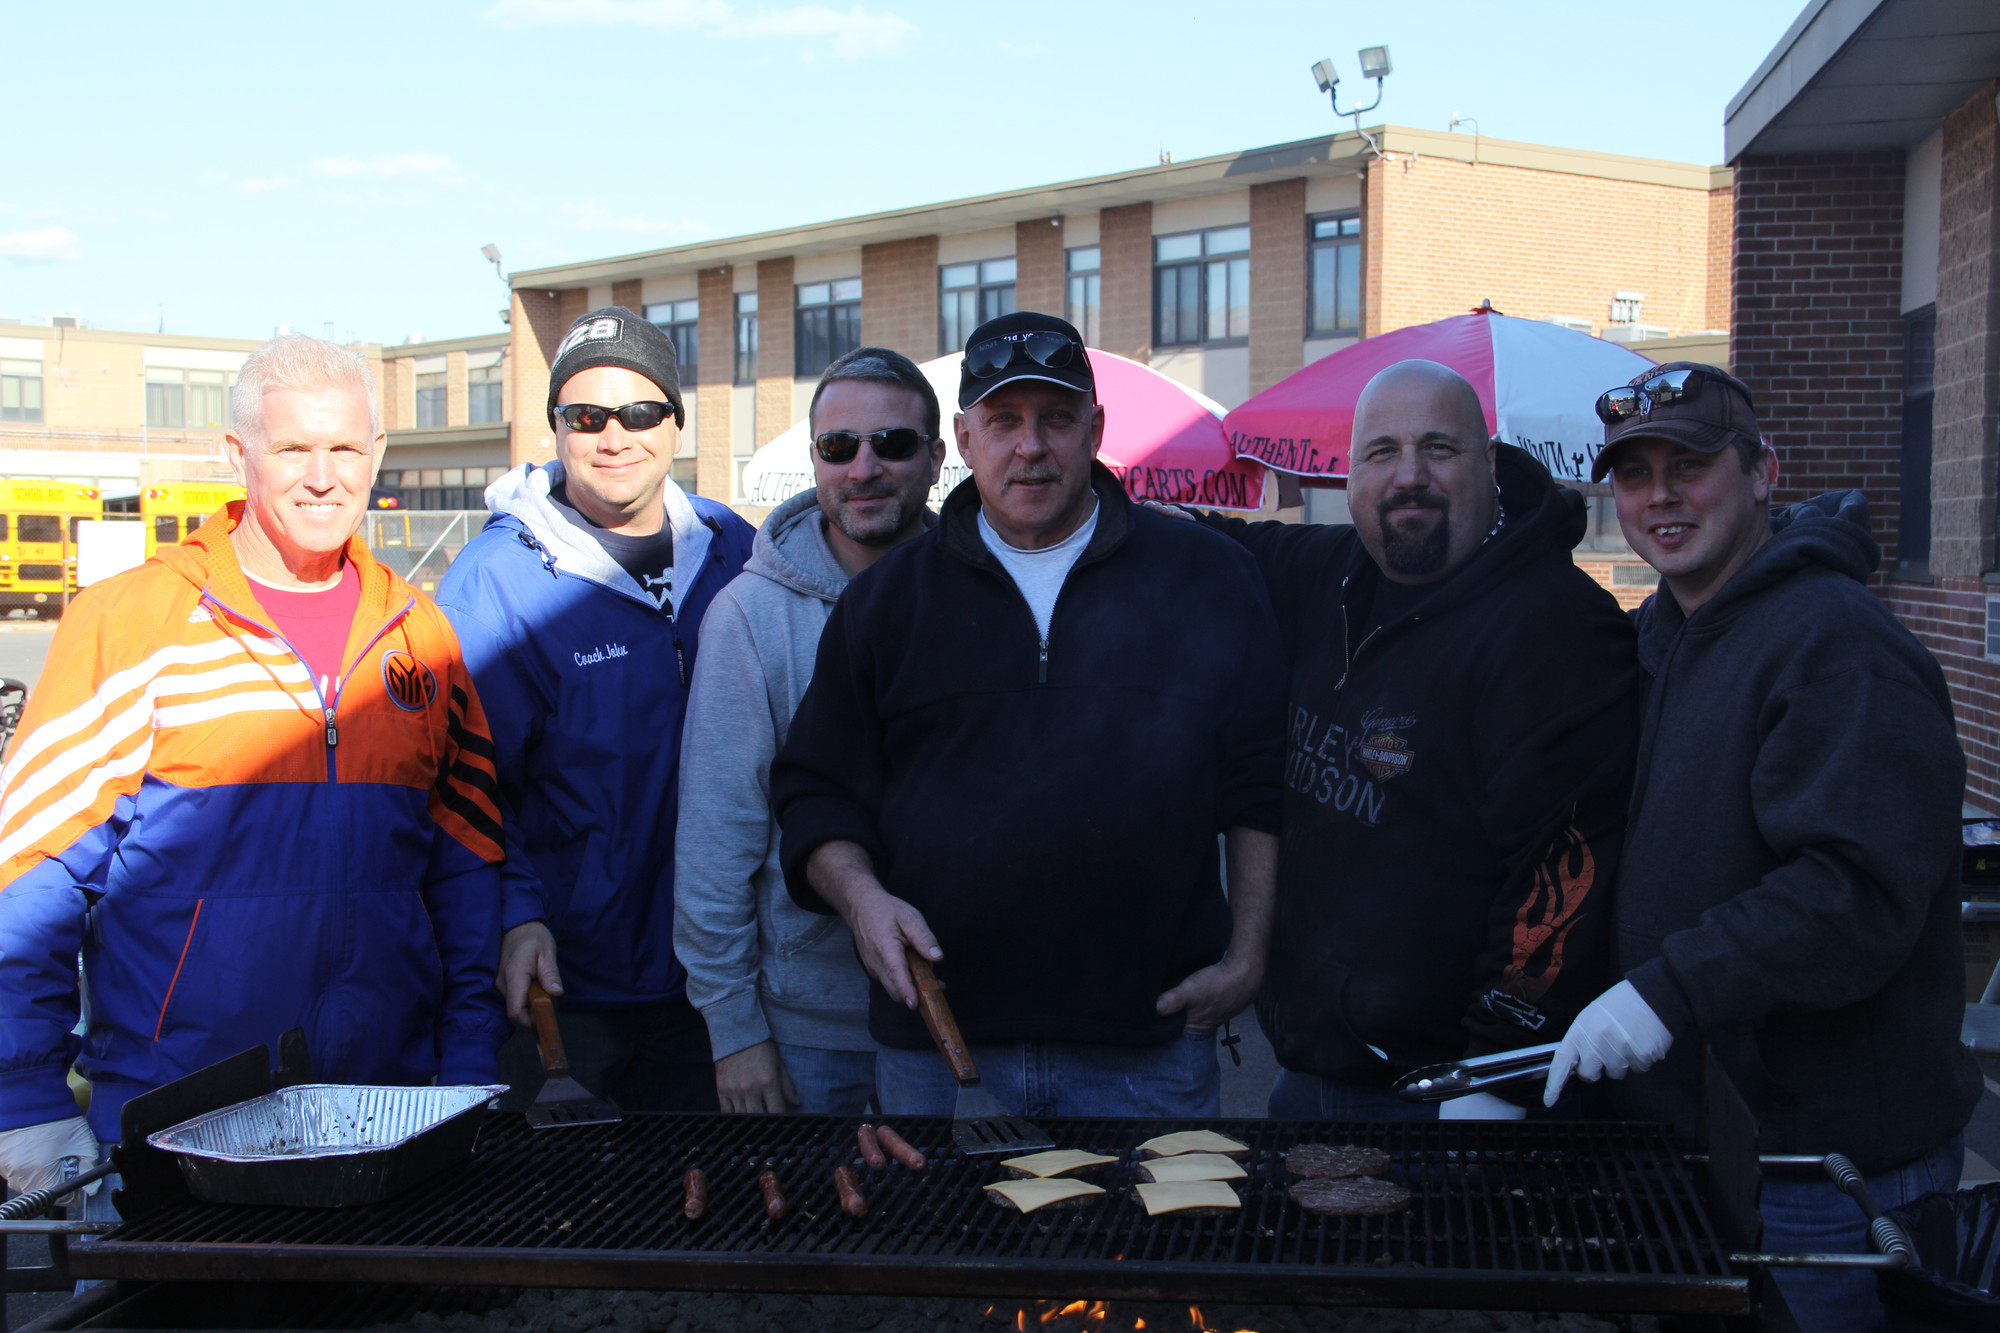 Ray Miley, John Egan, Dean Bacigalupo, Andy Weiner, Jerry Leo and John Cardiello manned the food station and BBQ